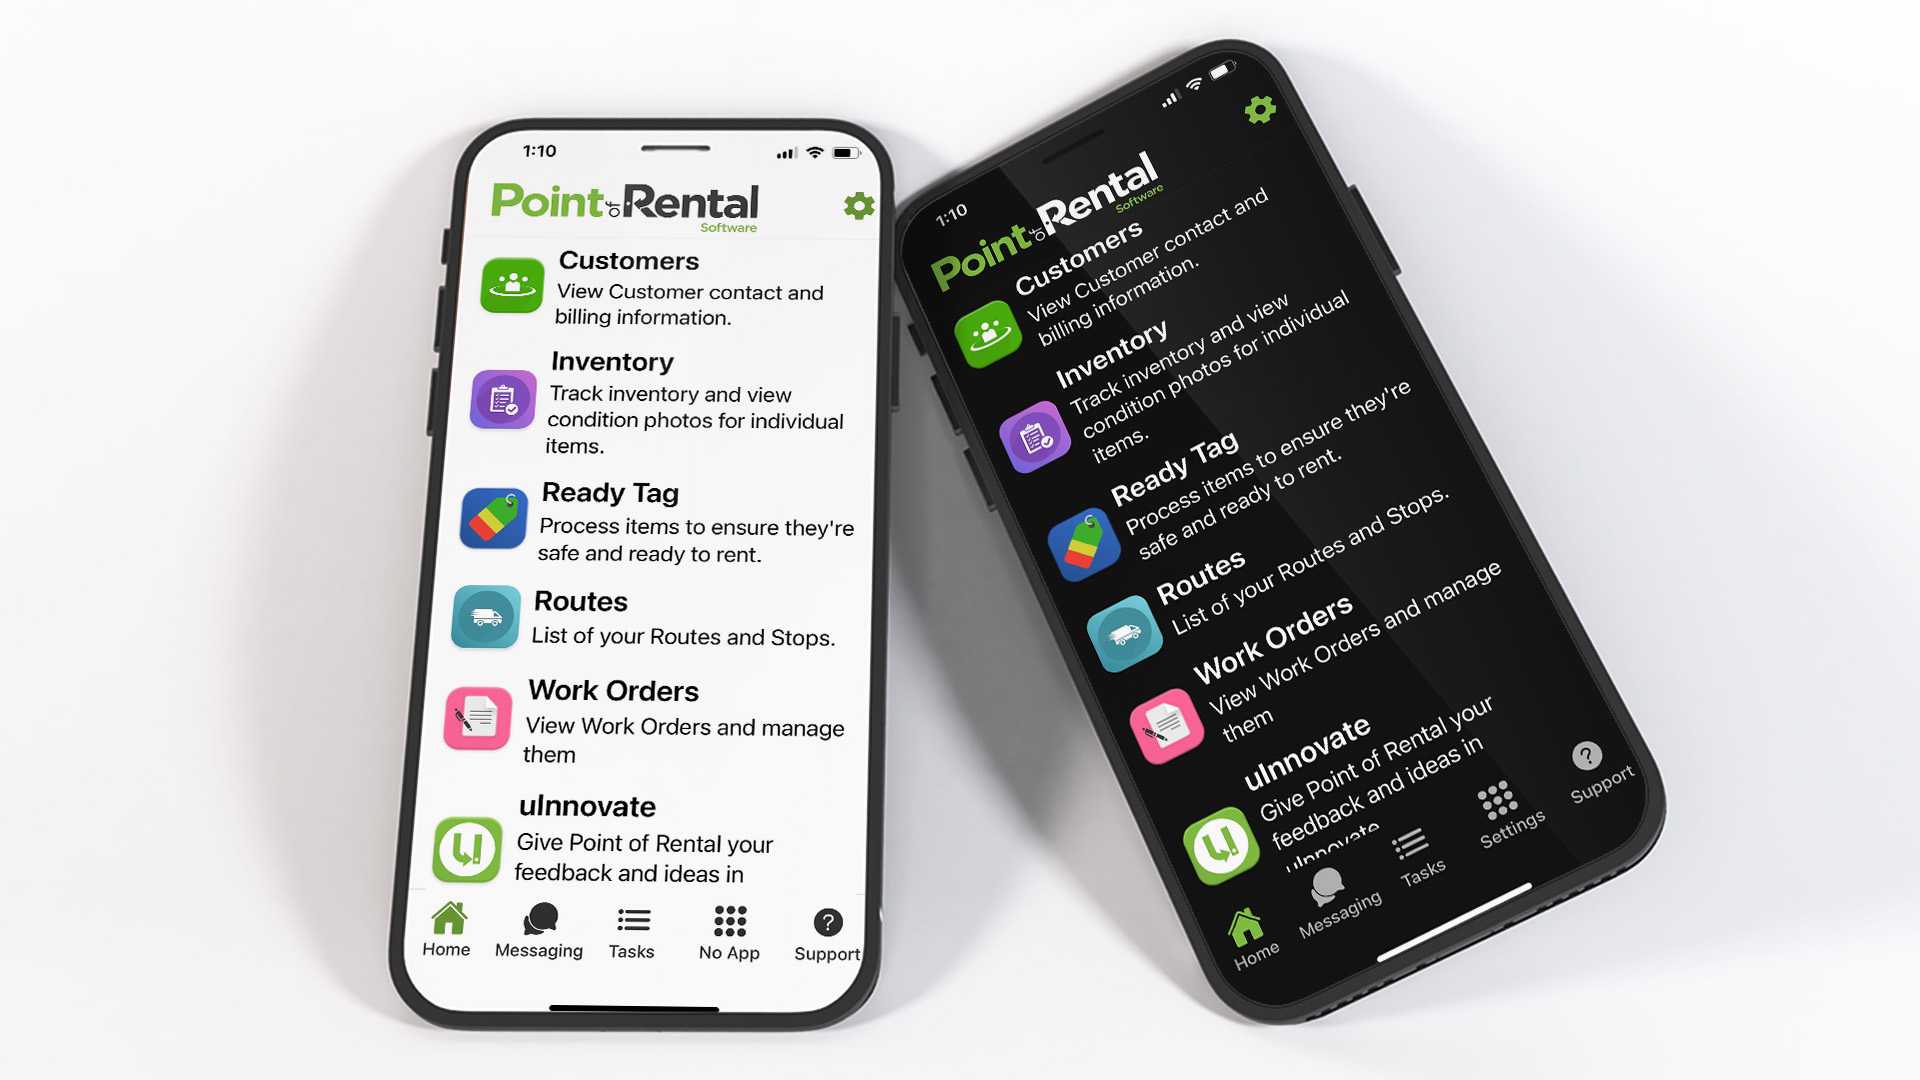 Work Orders now appears in the menu of these Point of Rental One home screens on mobile devices.